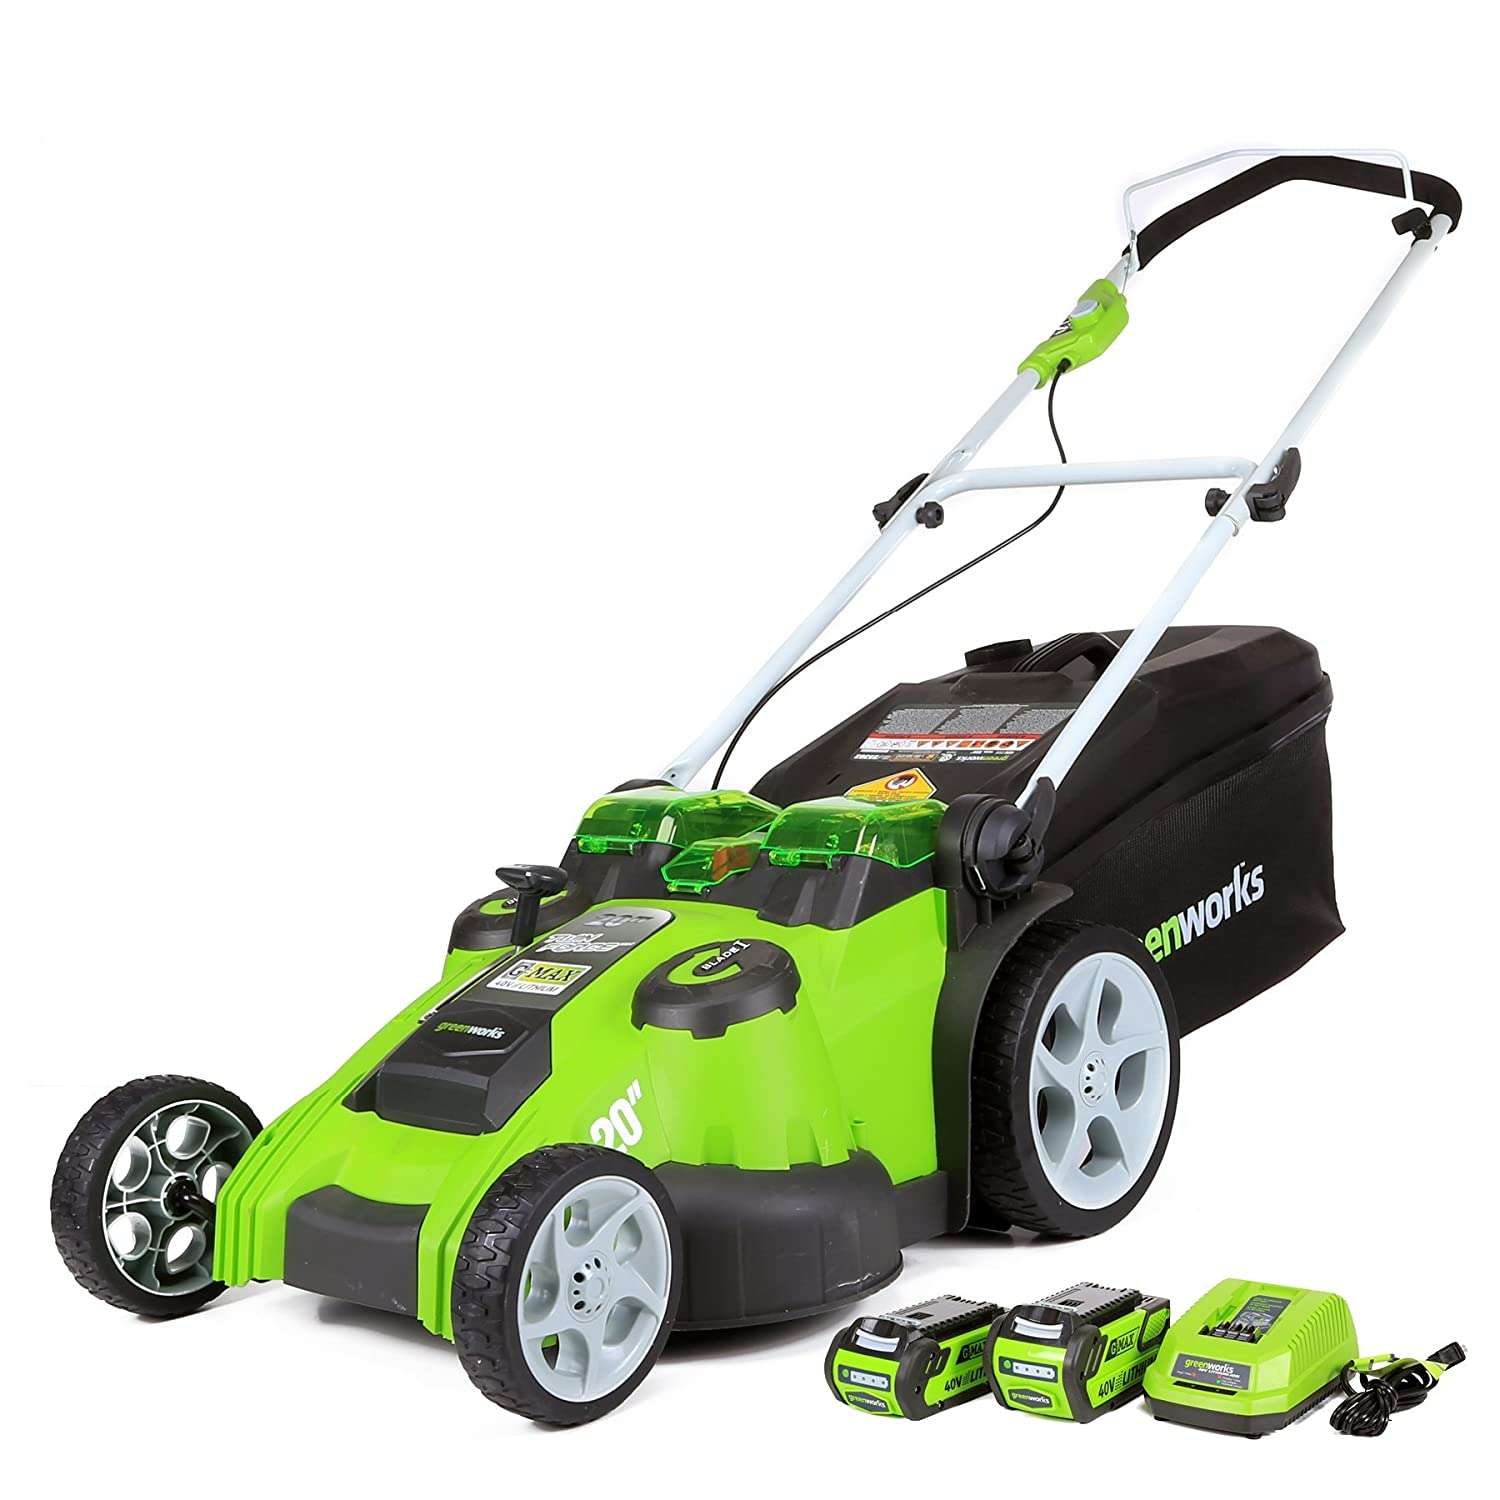 The Best Cordless Electric Lawn Mower (Top 4 Reviewed in 2019)